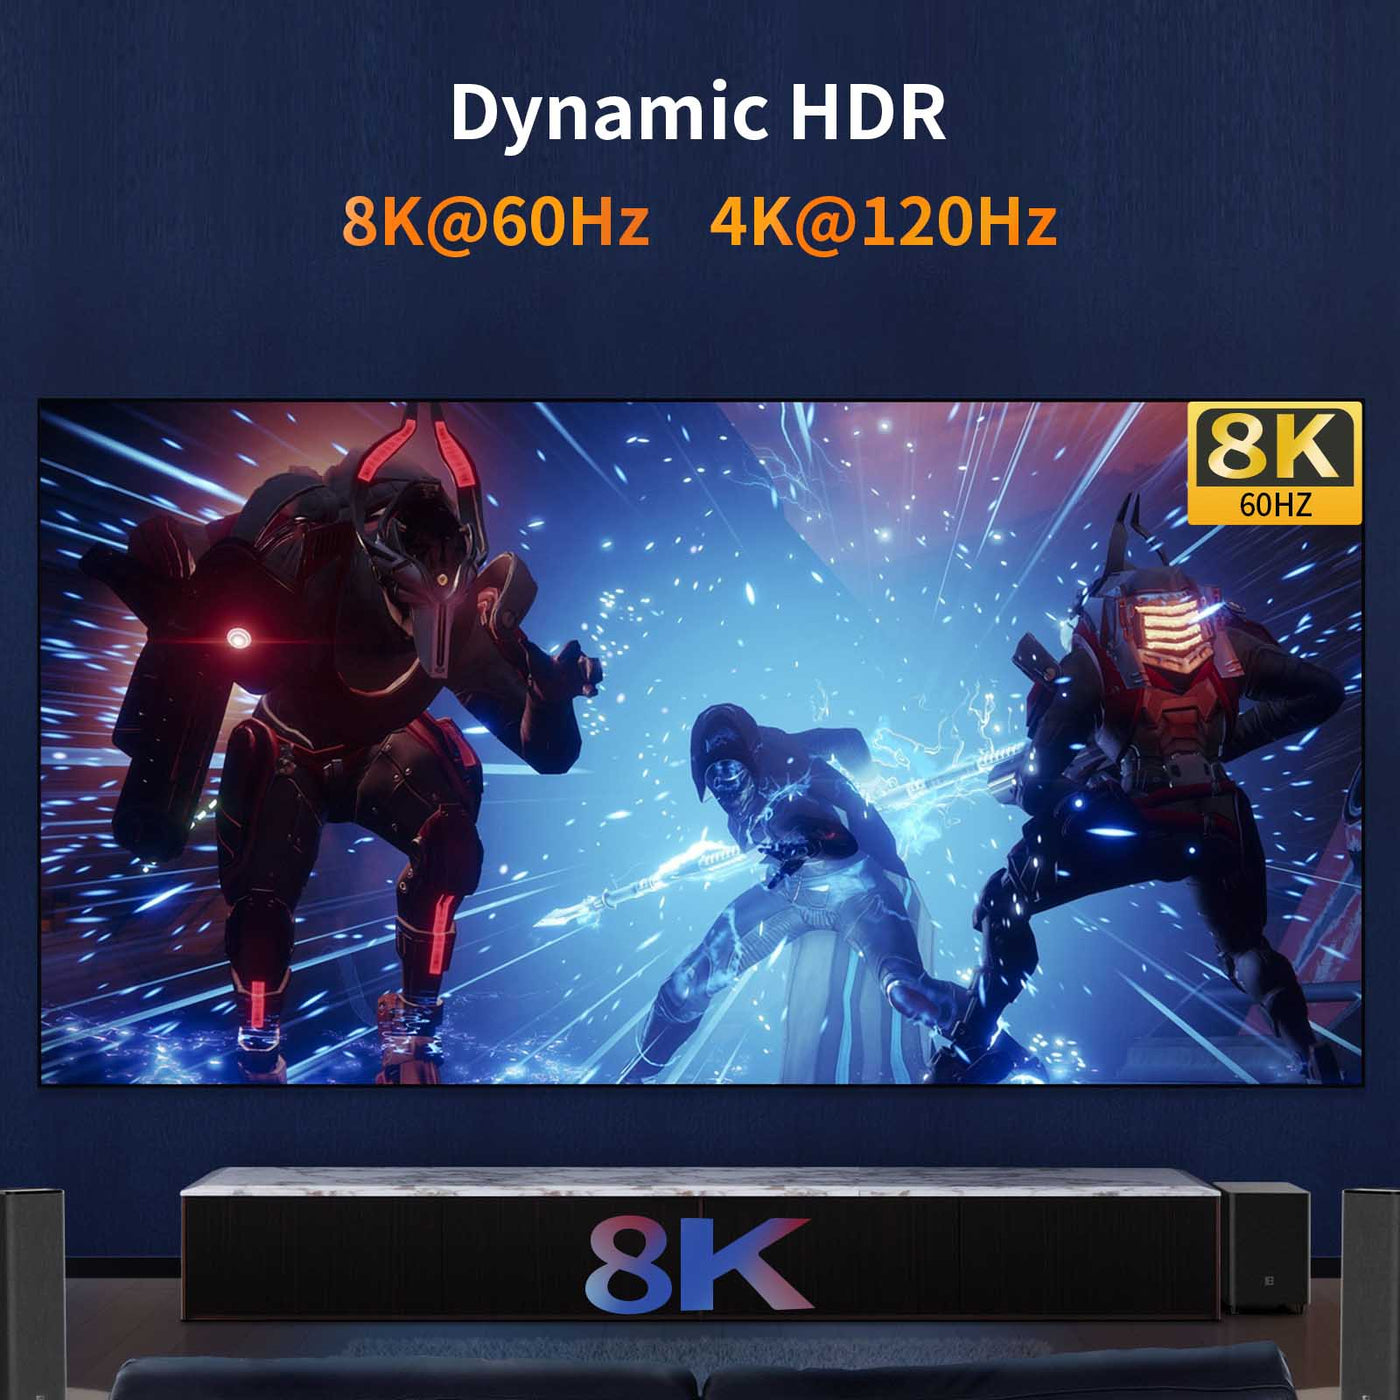 HDMI 2.1 supports Dynamic HDR